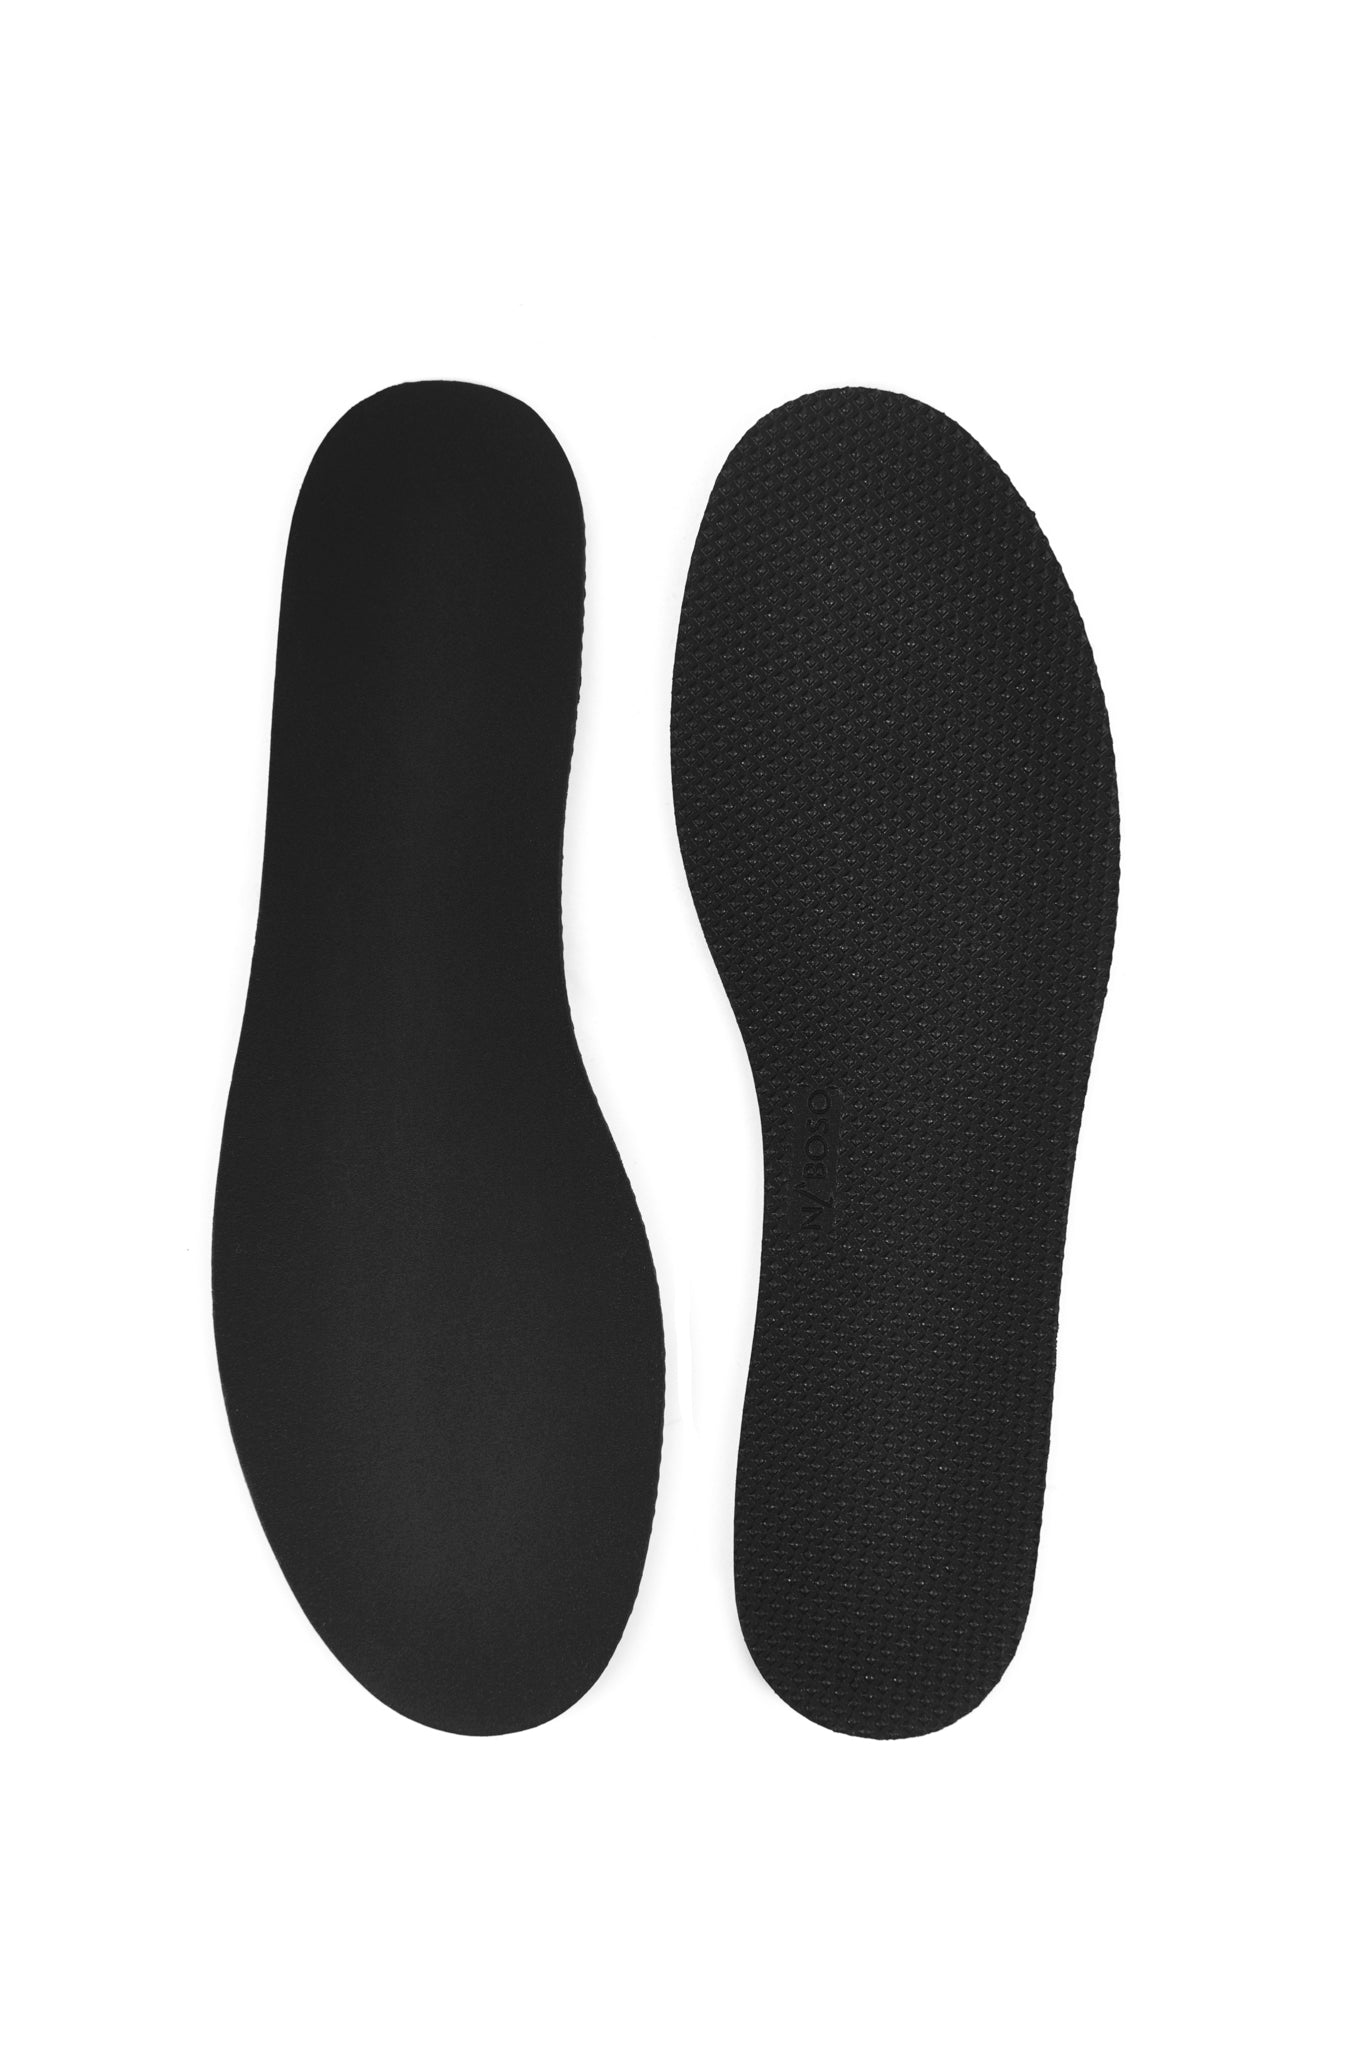 Front and back view of the black Naboso Children's Insole